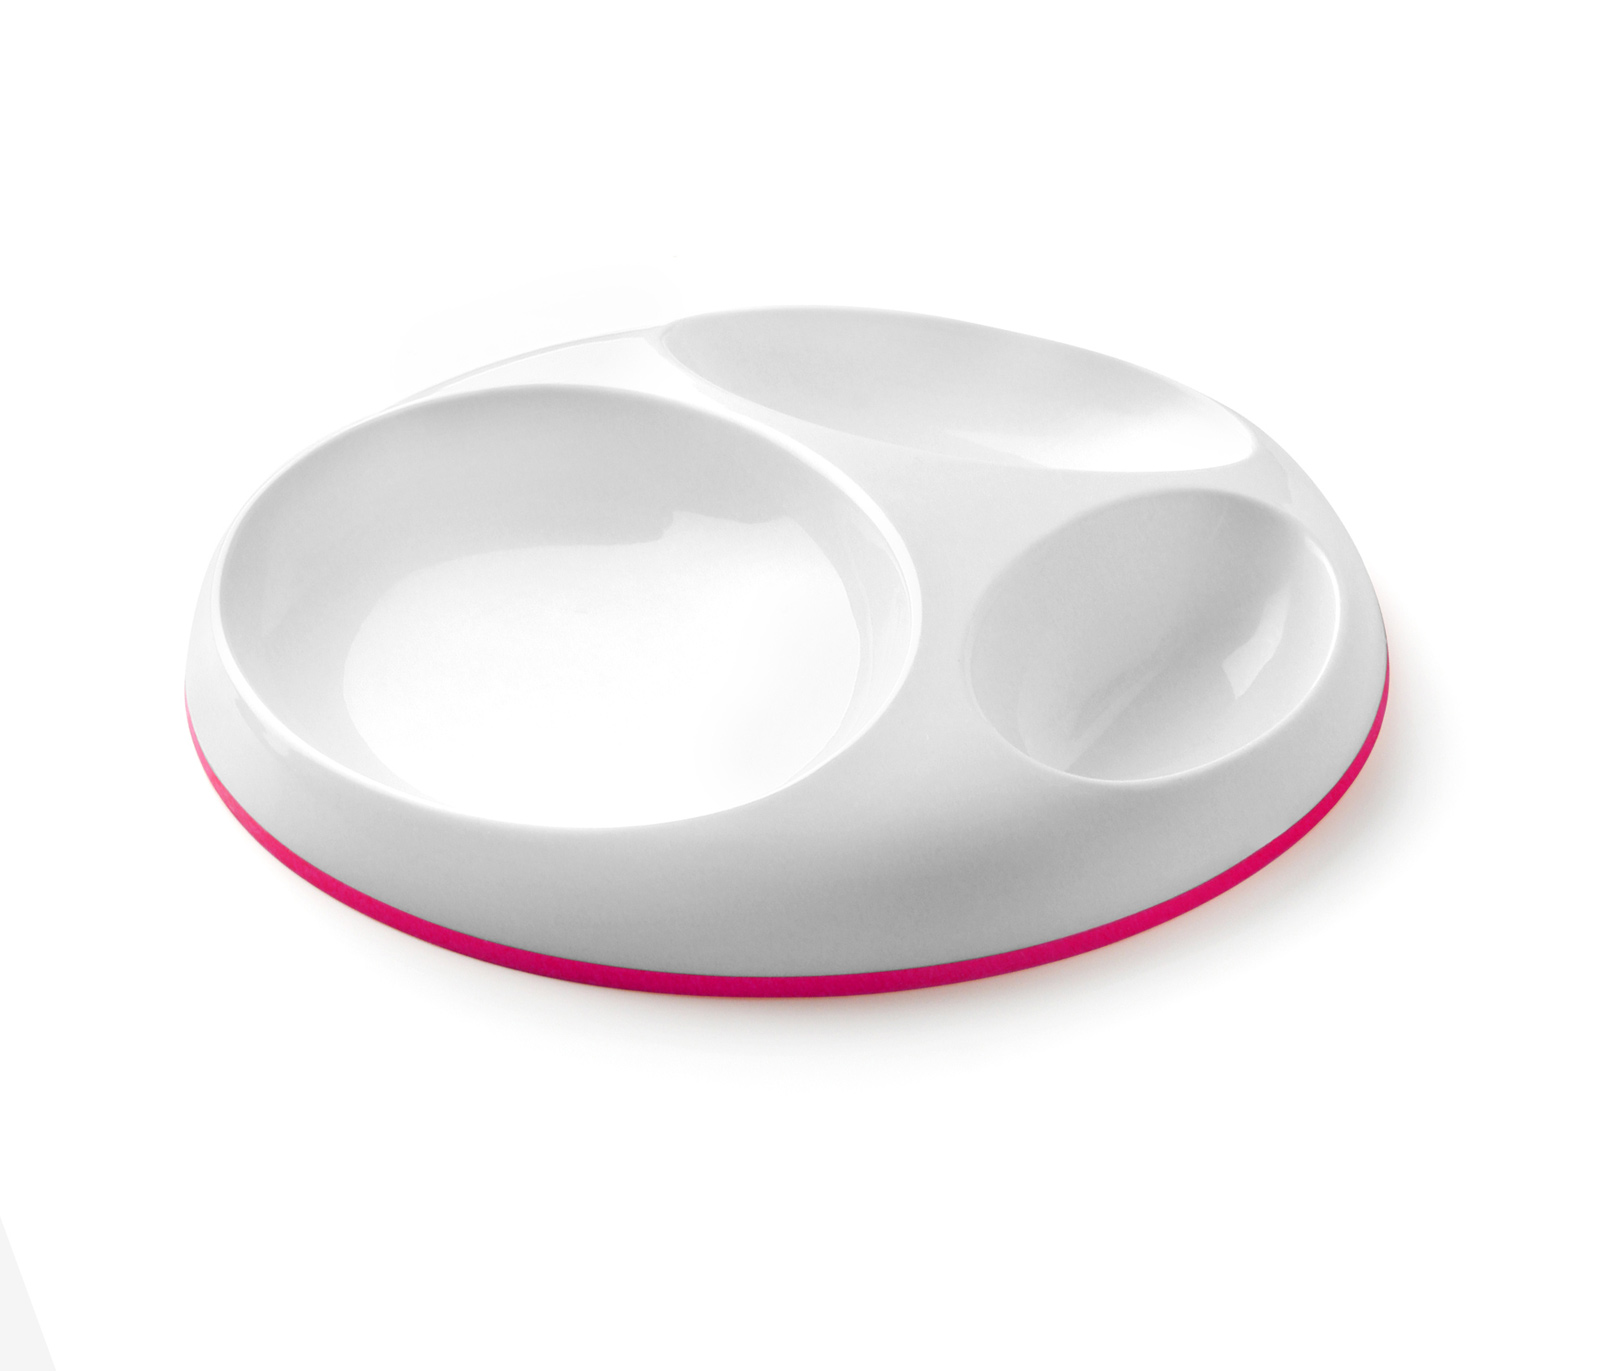 Boon - Saucer - Pink/White